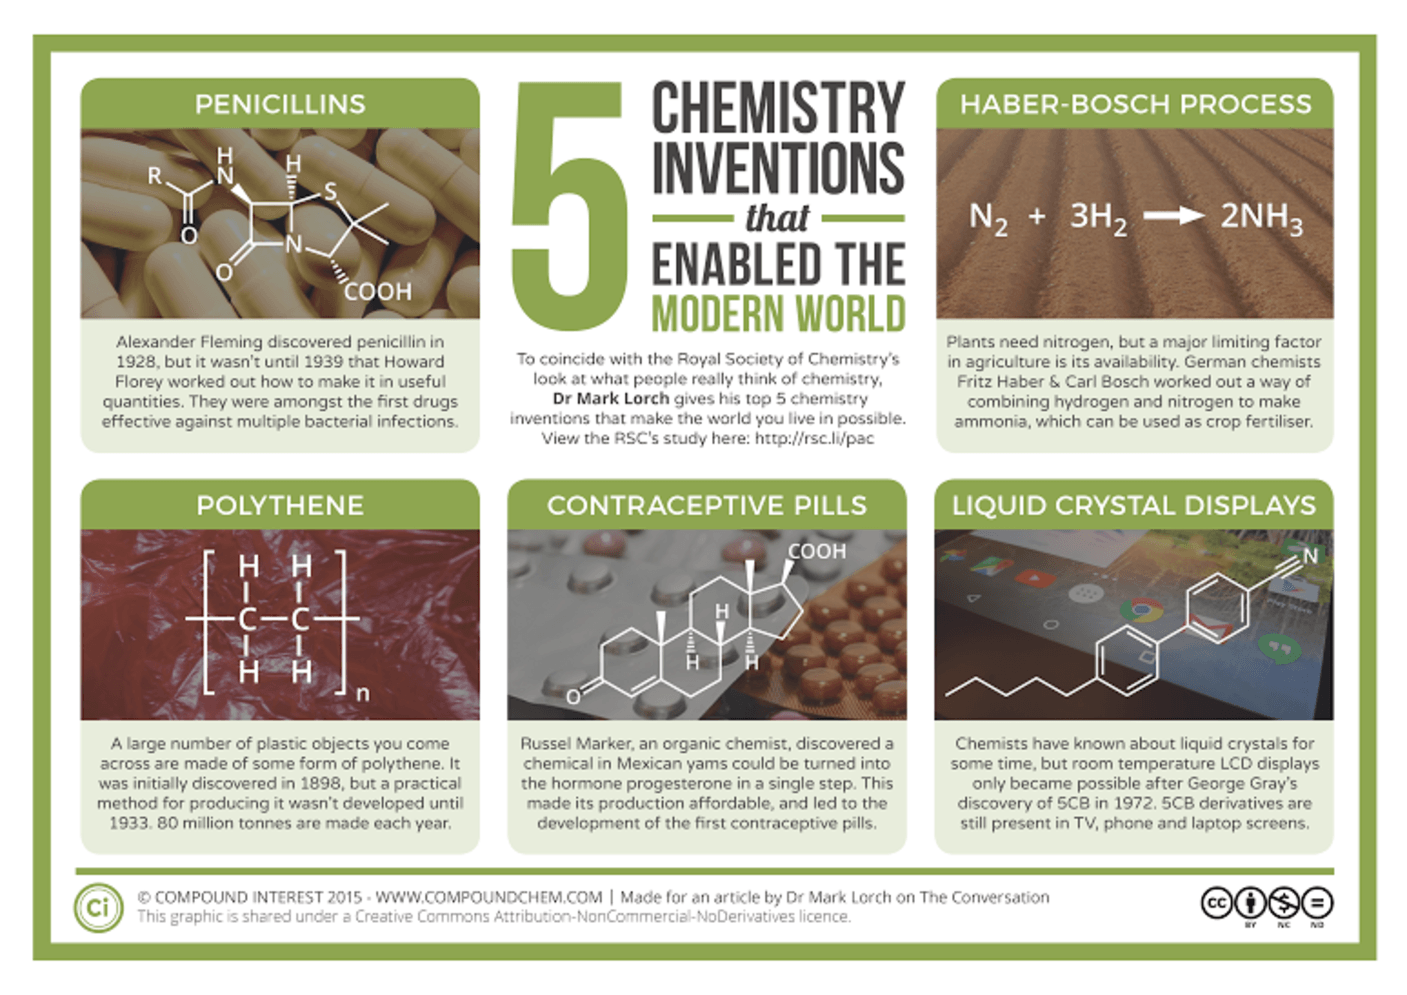 Five chemistry inventions that enabled the modern world